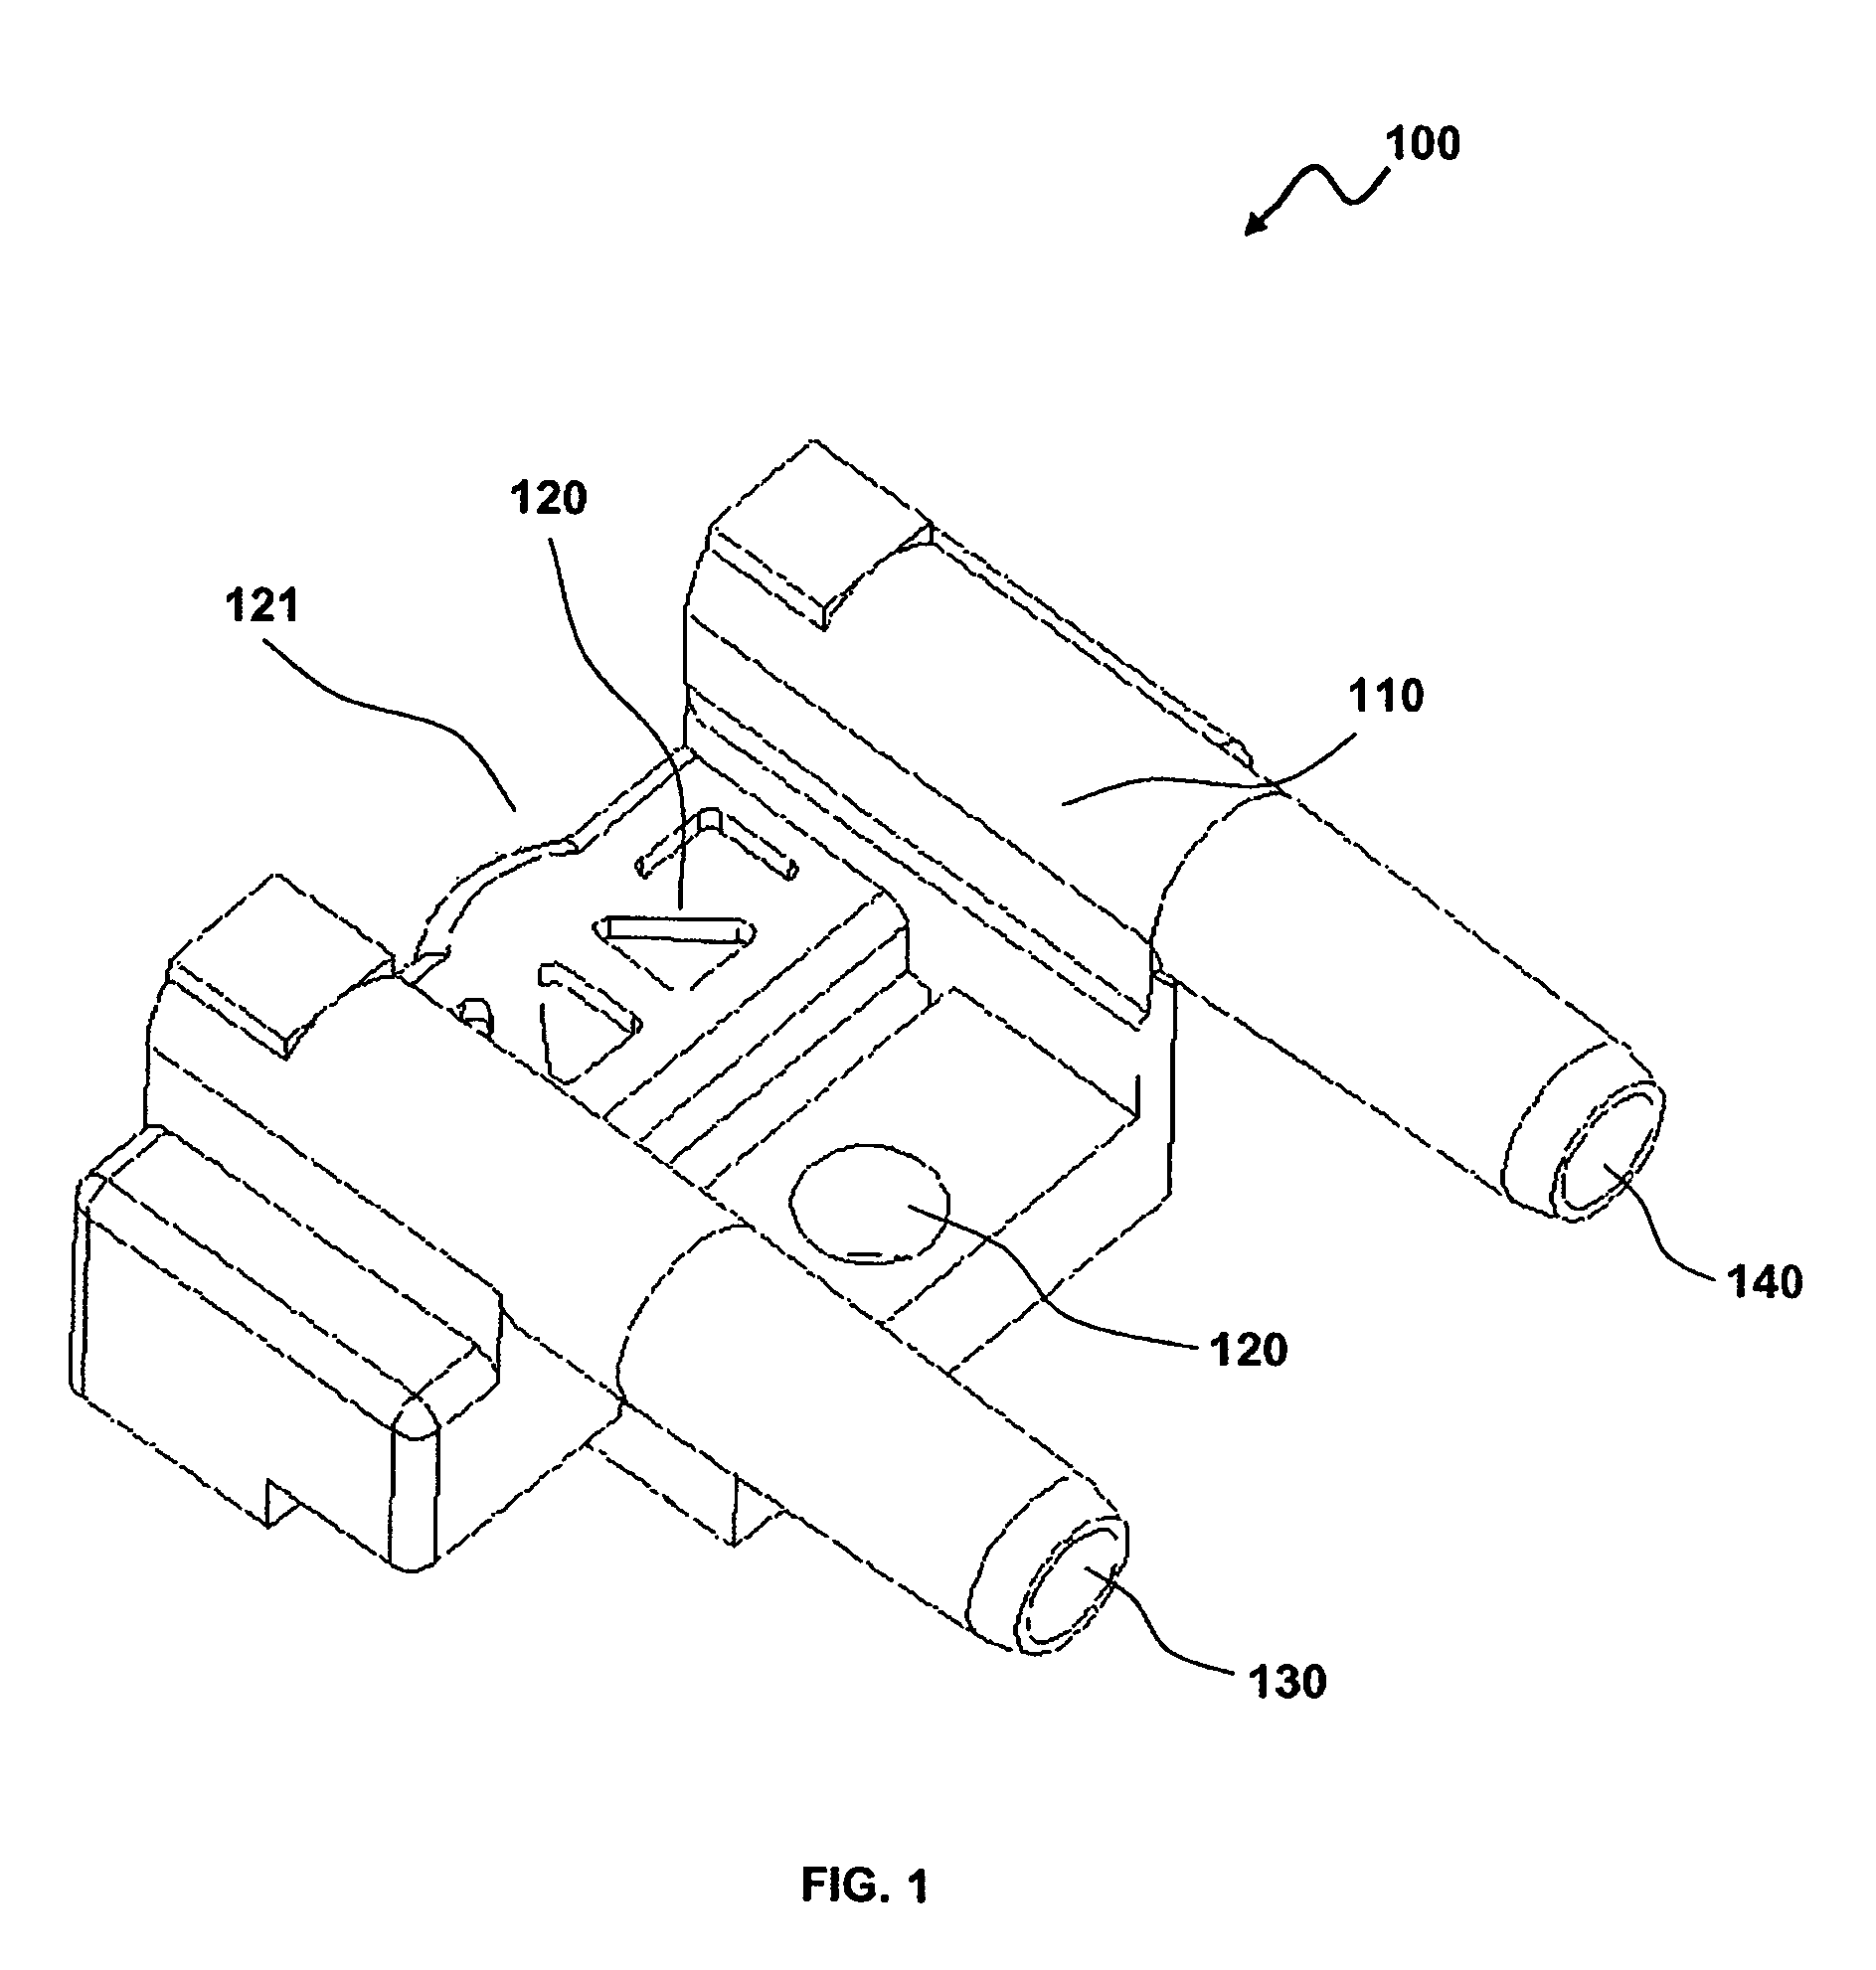 Flow sensing device including a tapered flow channel